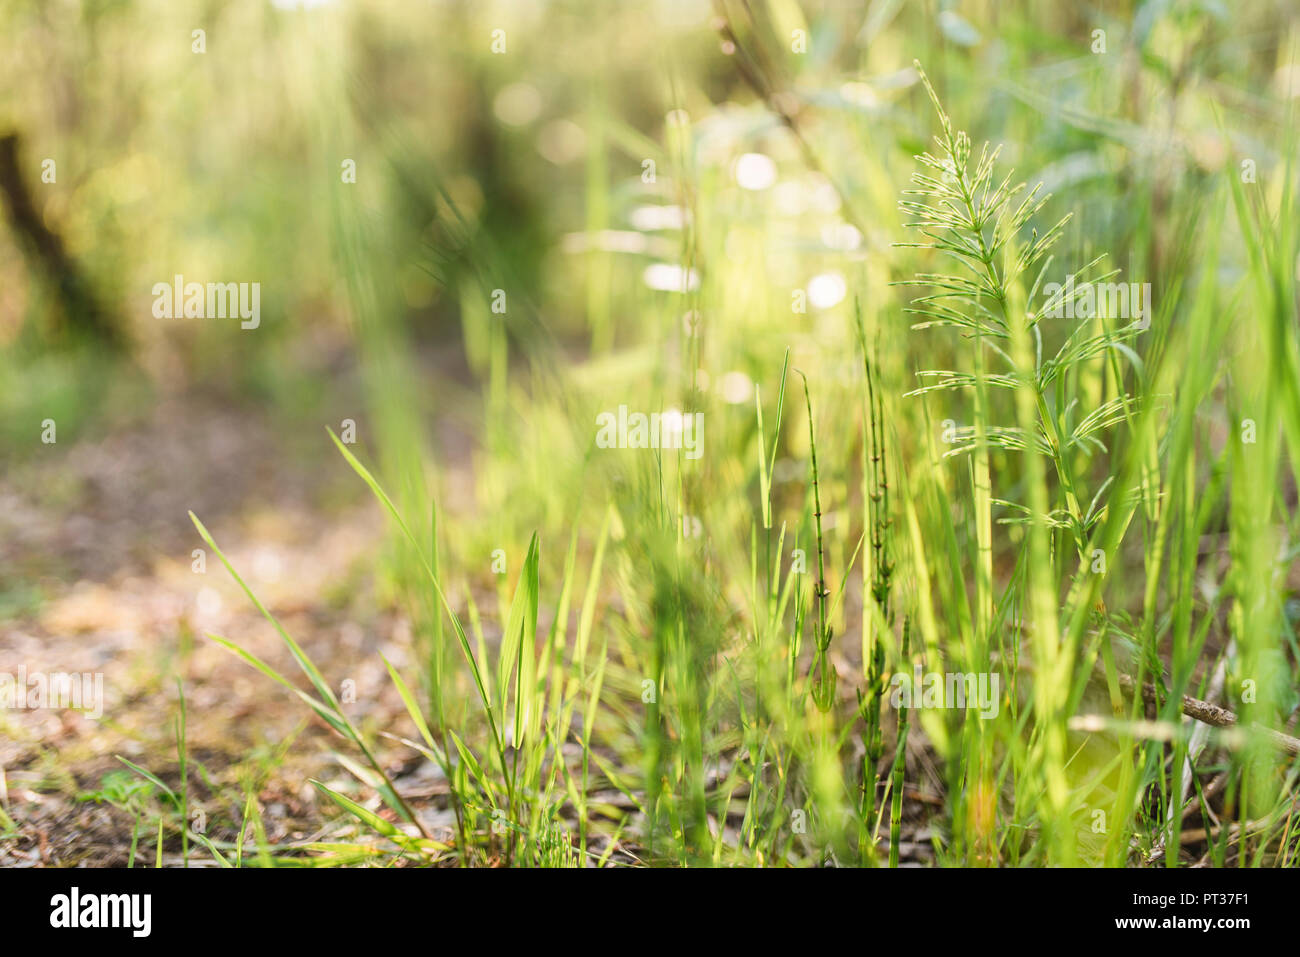 Ferns in the forest in sunlight, lush green Stock Photo